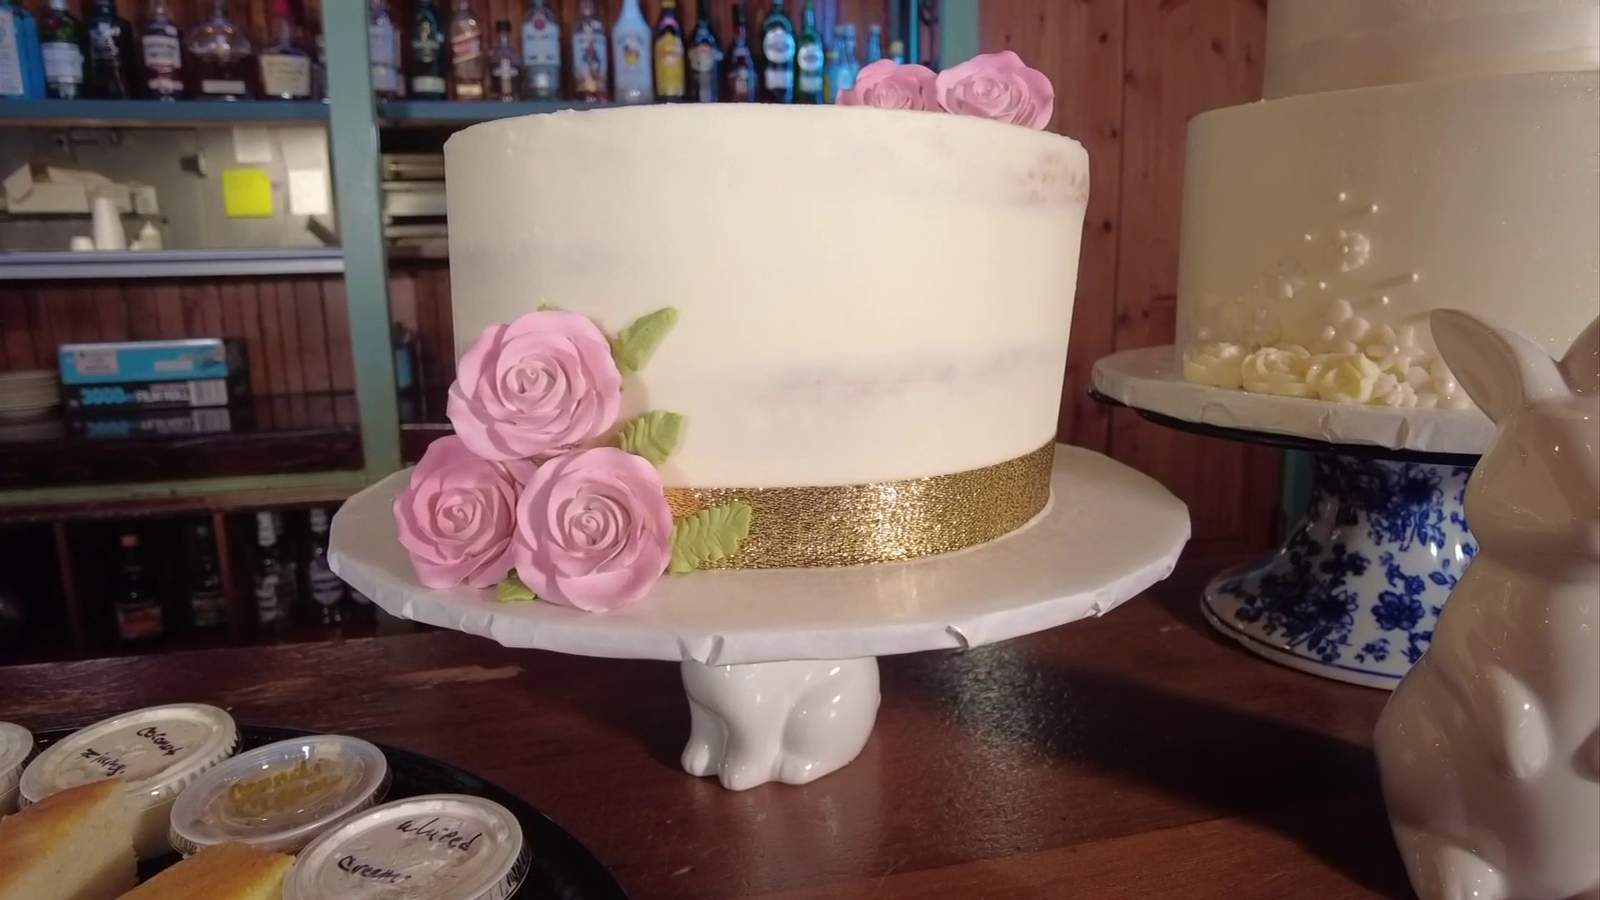 Check out this Roanoke bakery’s wedding cakes